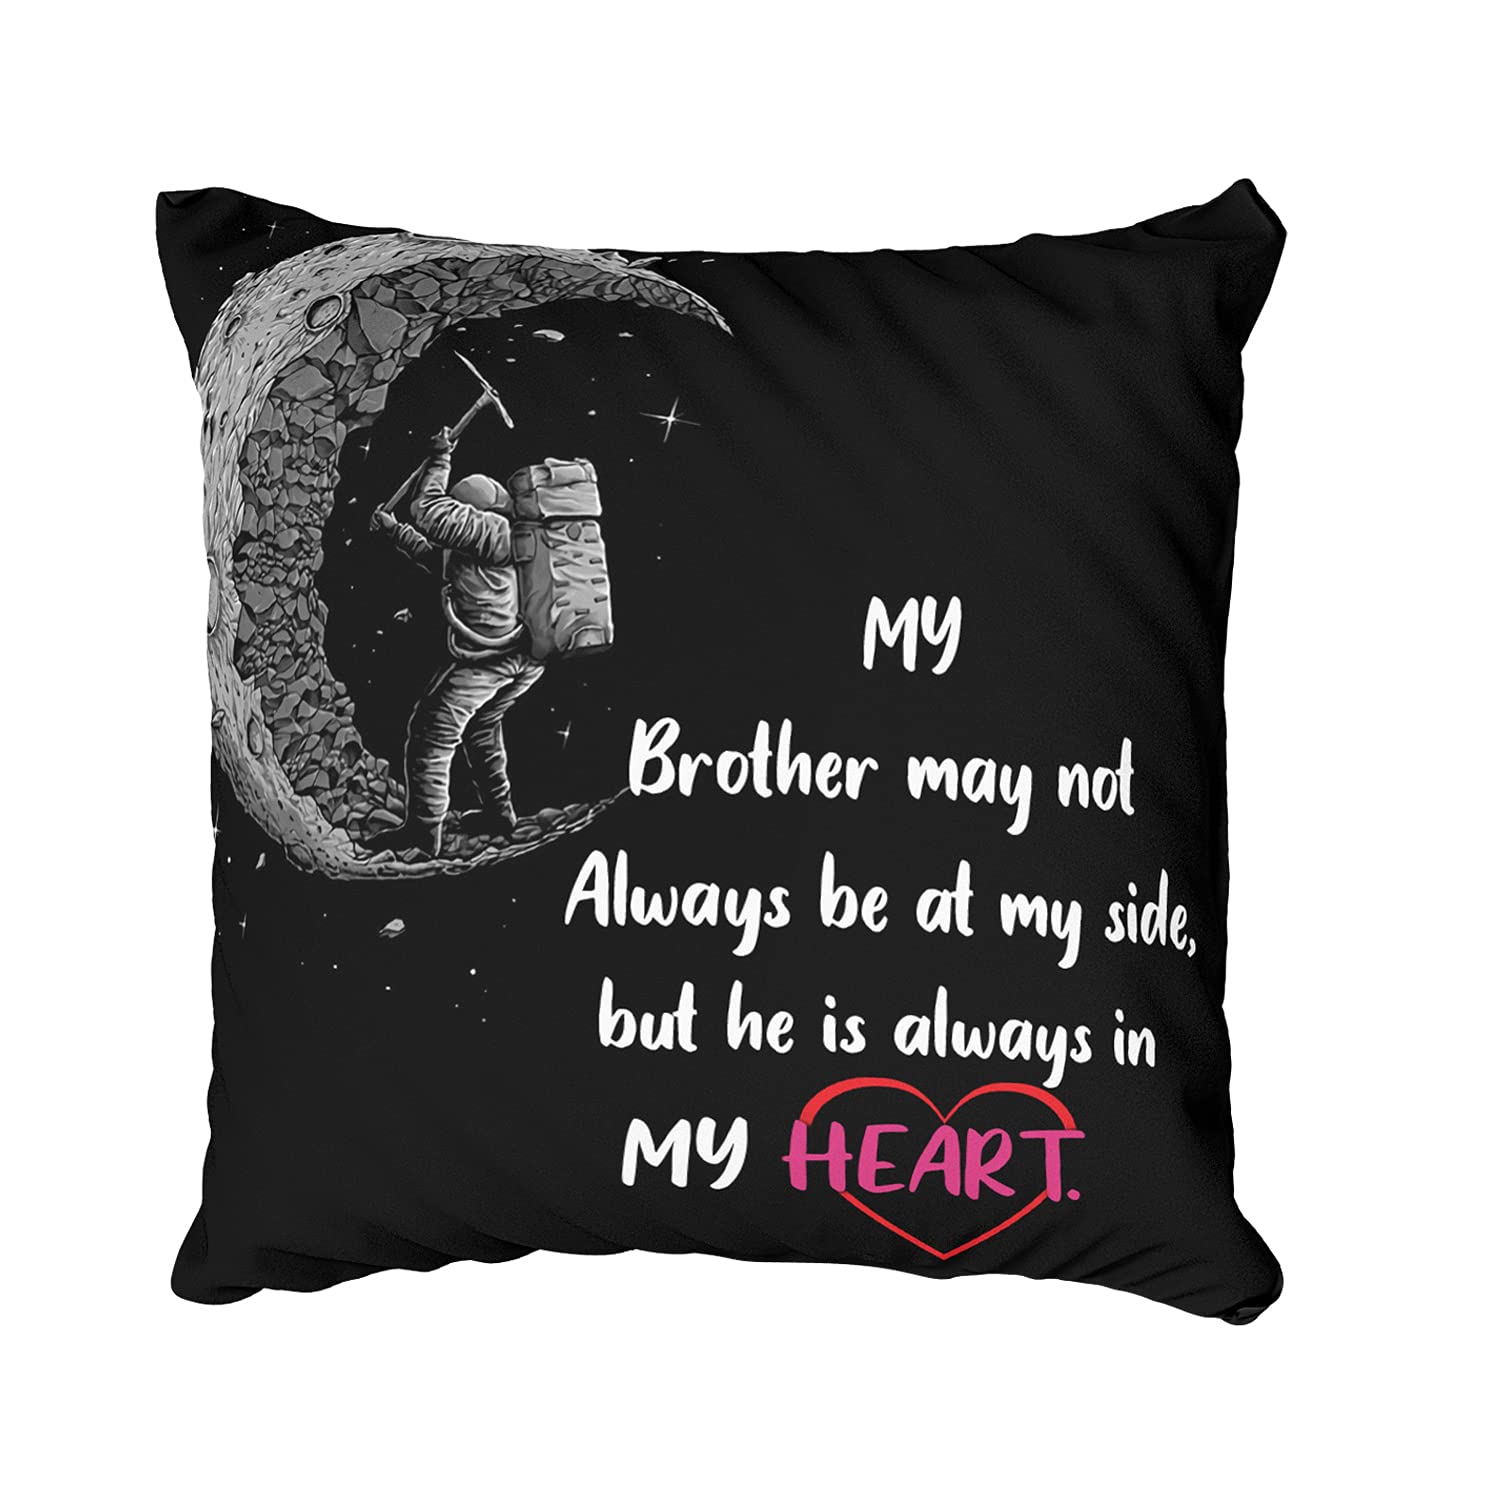 Brother cushions